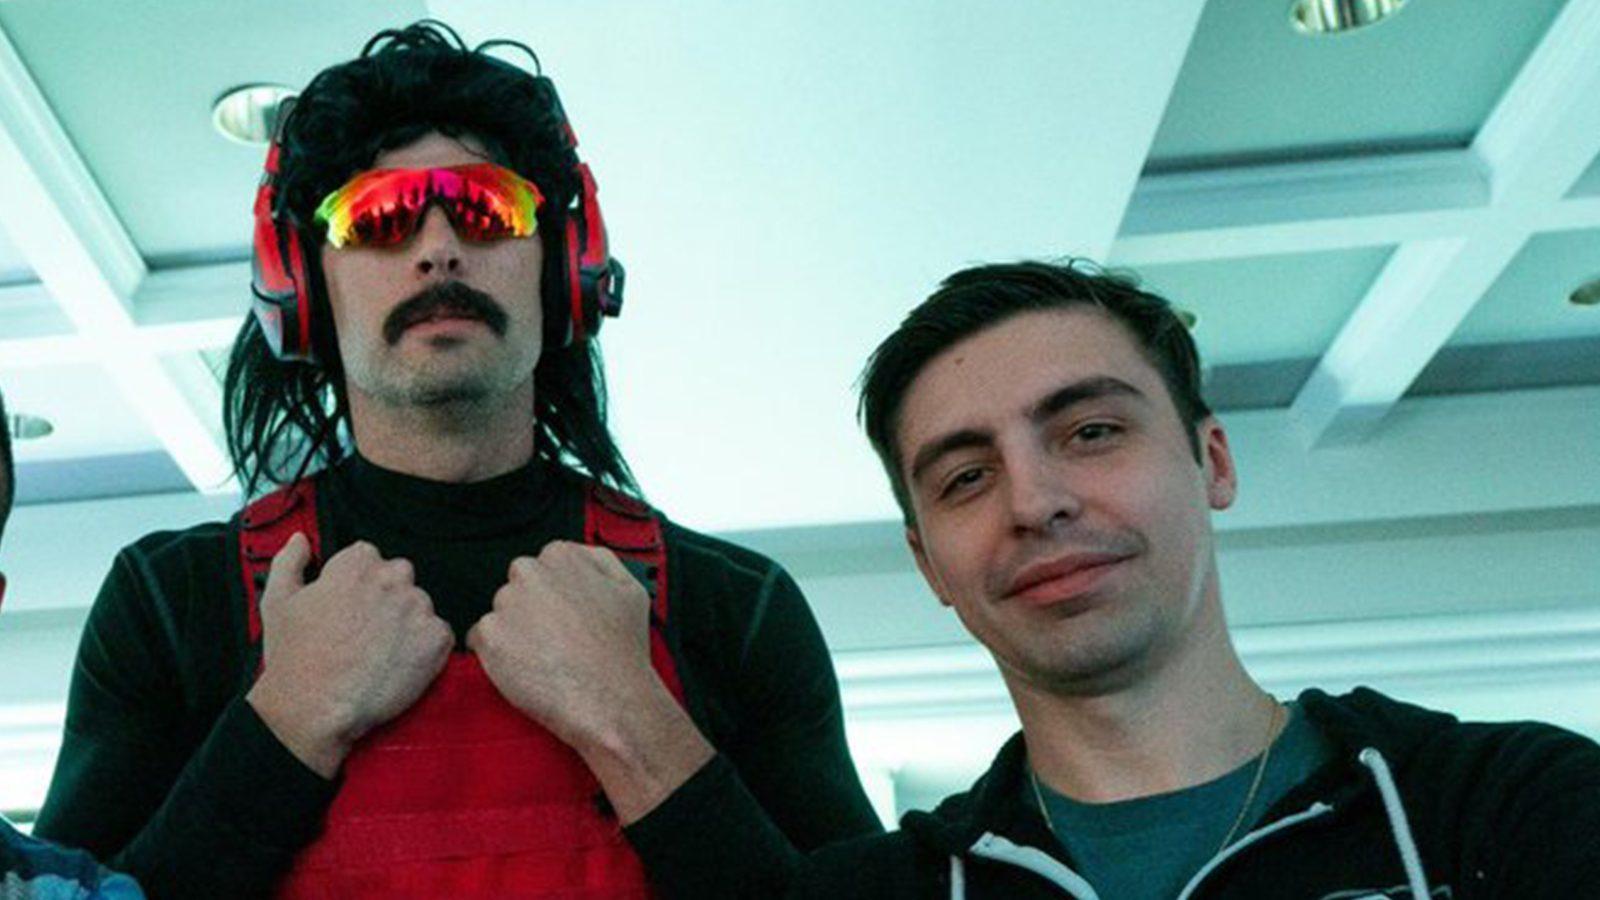 An image of Shroud and Dr Disrespect standing together